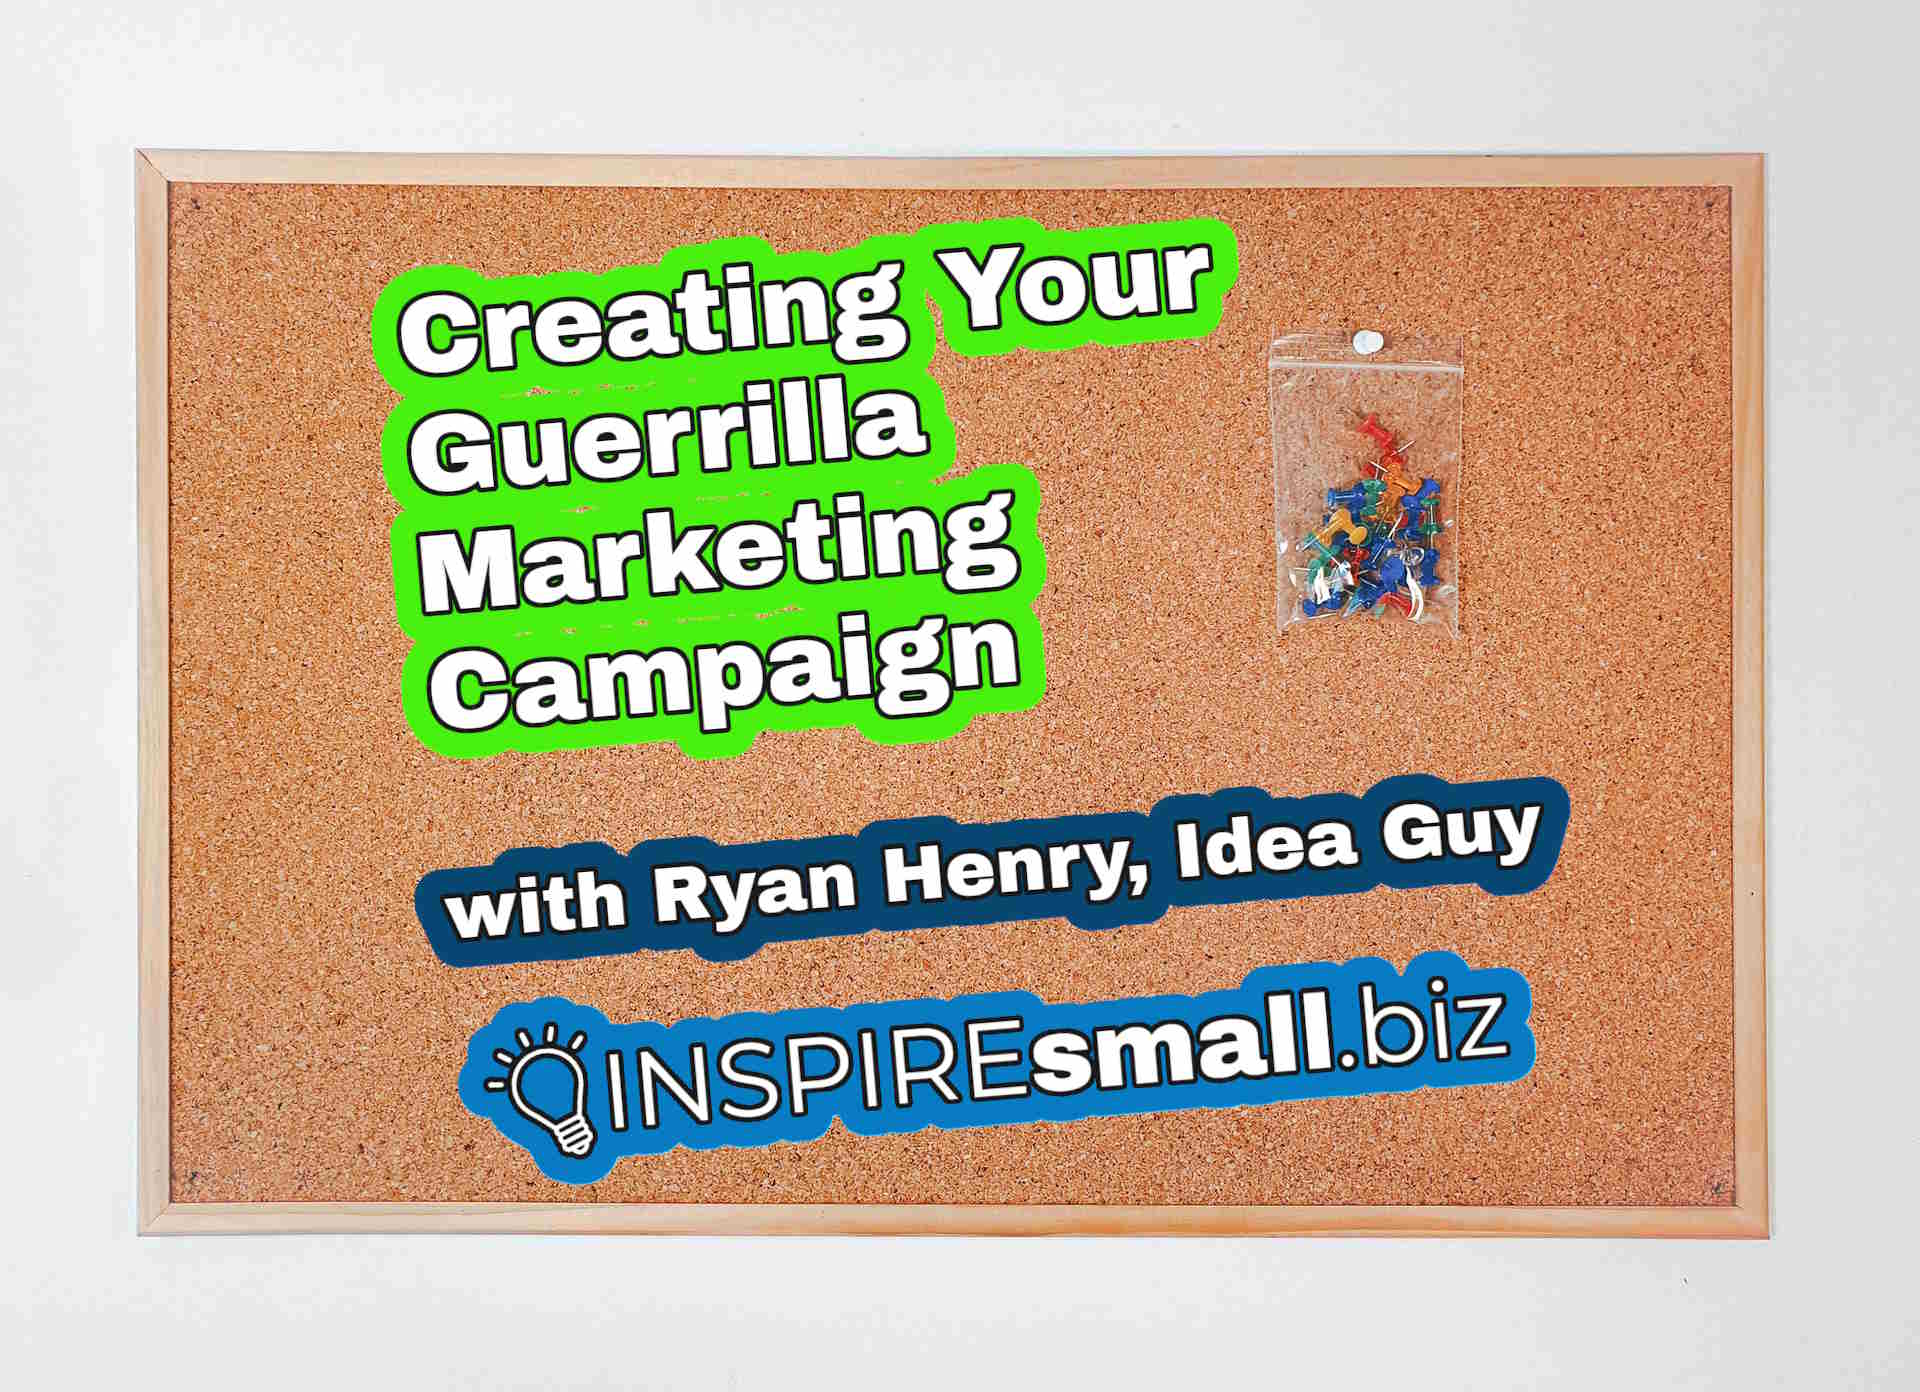 A bullitin board with some push pins in a plastic bag, and multicolored text, Creating Your Guerrilla Marketing Campaign with Ryan Henry, Idea Guy, INSPIREsmall.biz